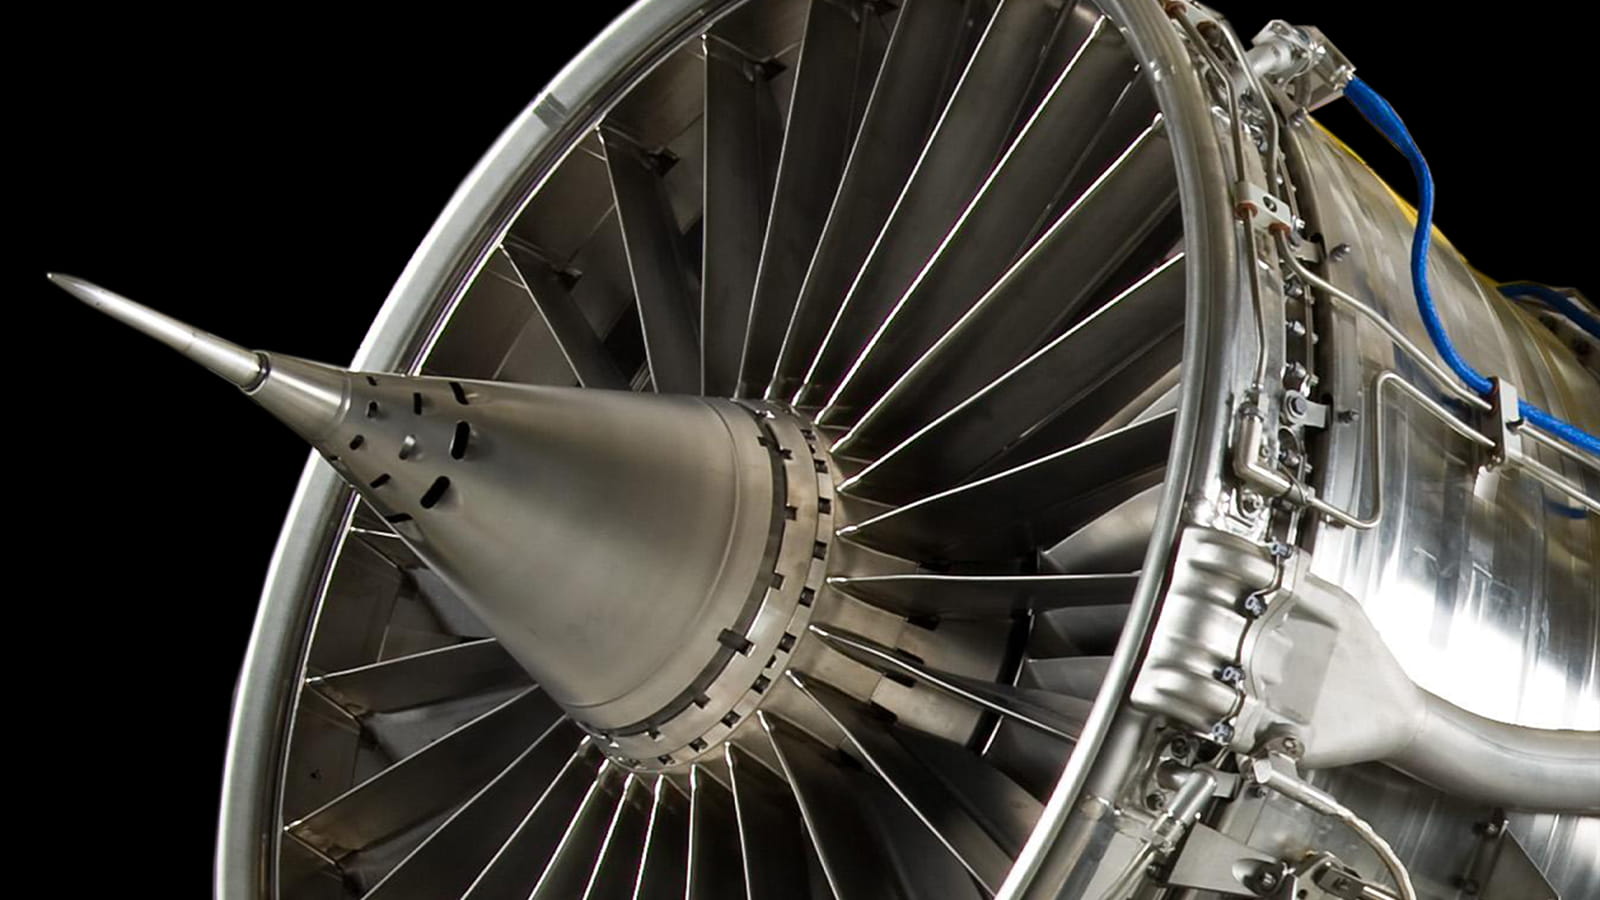 A close-up showing the fan blades of a military jet engine.